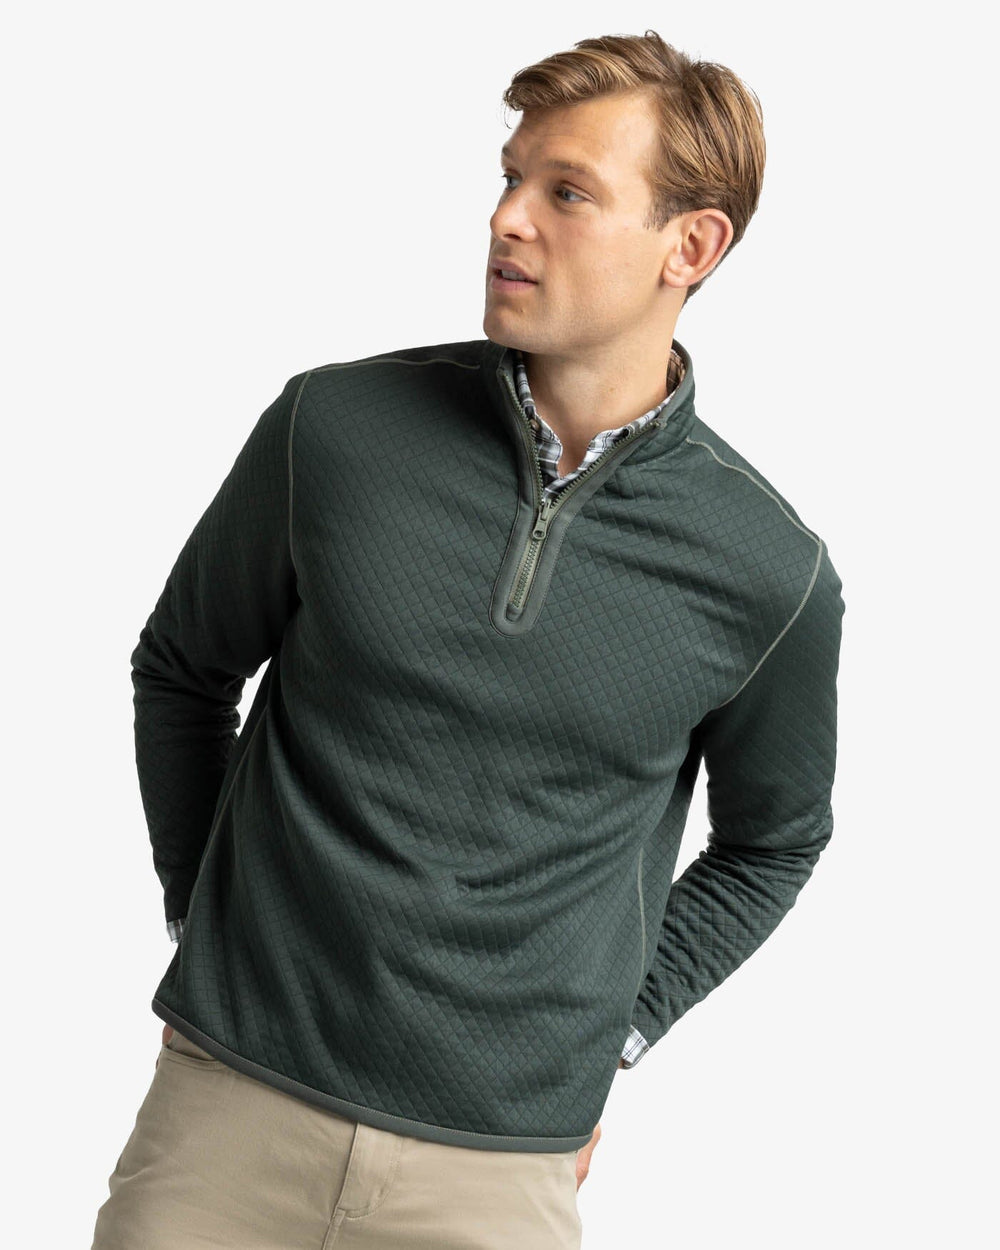 The front view of the Southern Tide Arden Reversible Quarter Zip by Southern Tide - Gulf Green